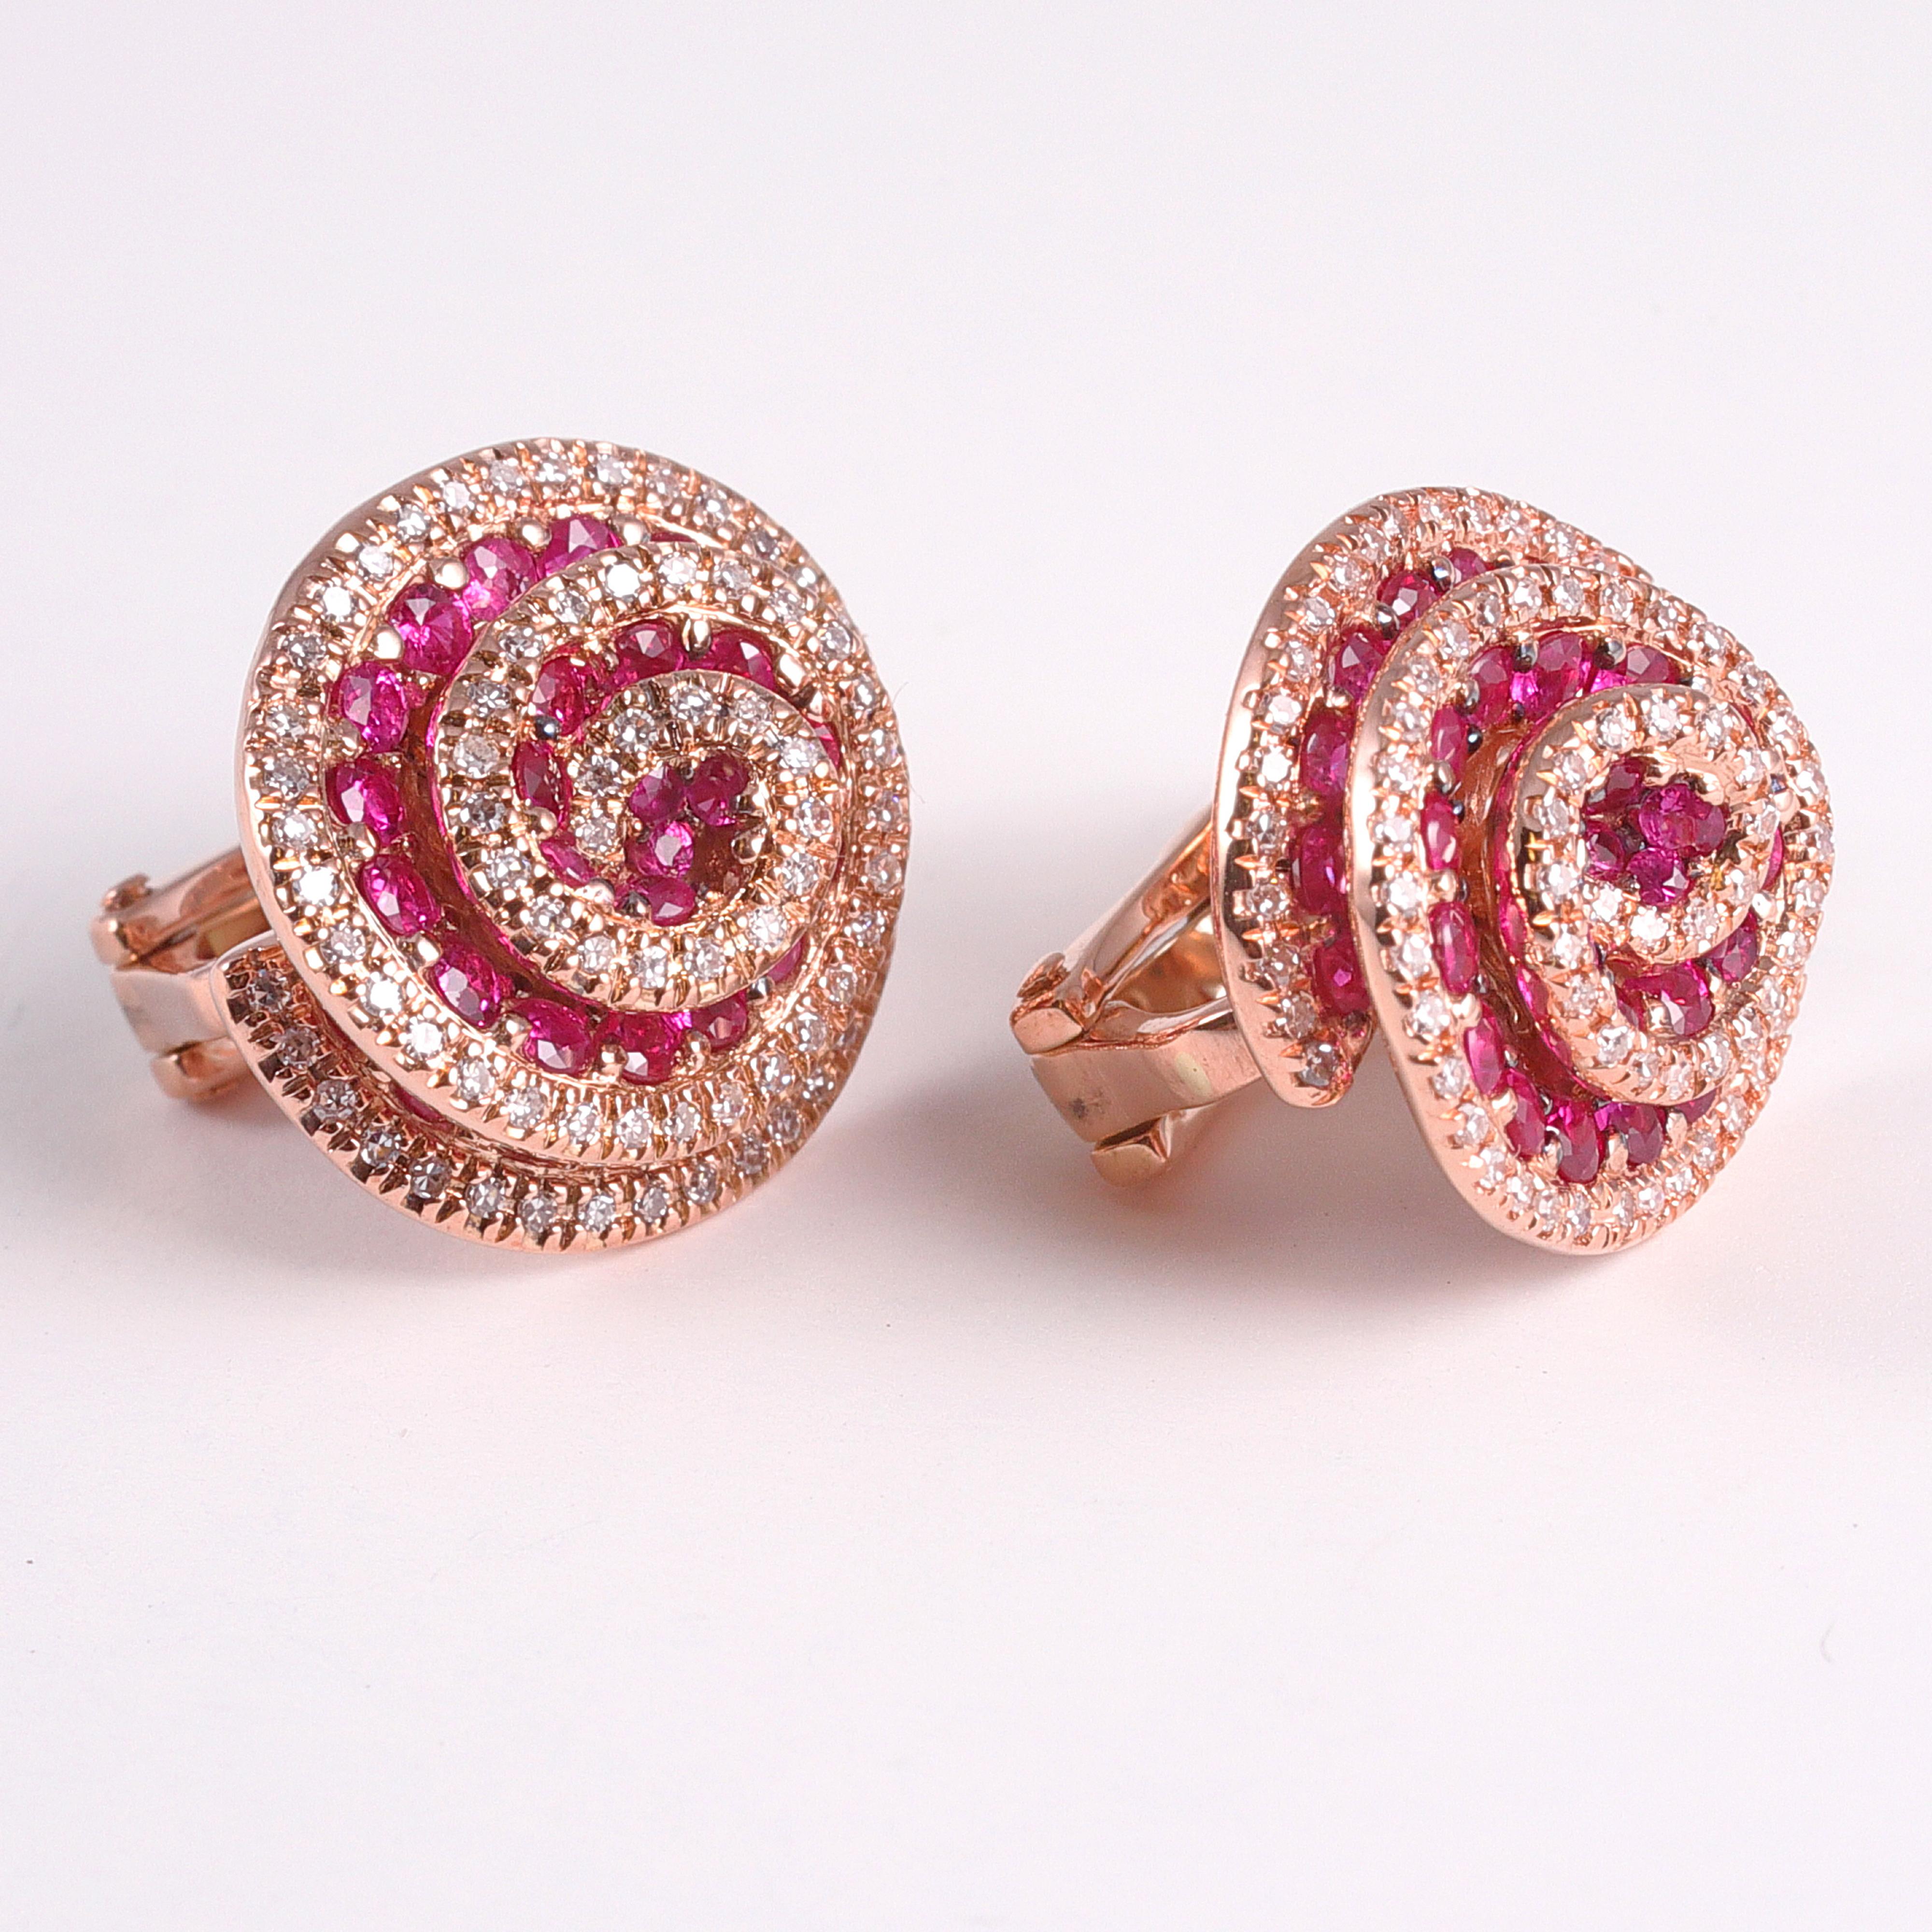 Delightful swirls of diamonds and rubies set in 14 karat rose gold by EFFY.  These earrings feature a french back for extra comfort and security.

